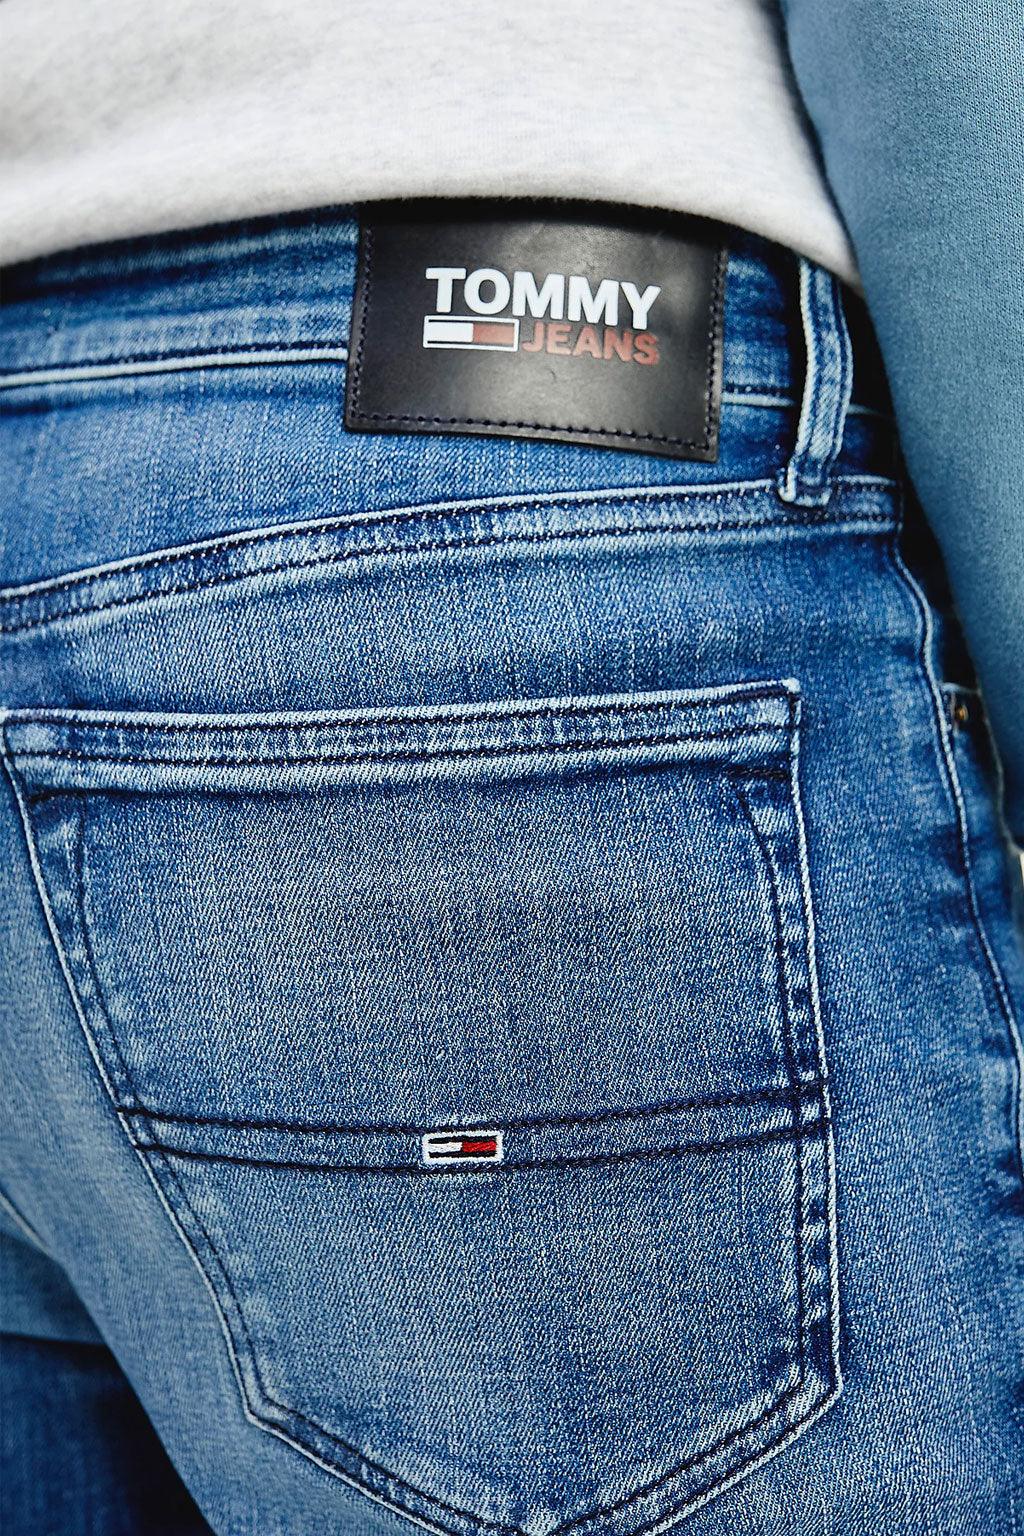 Tommy Jeans jeans | Big Boss | the menswear concept